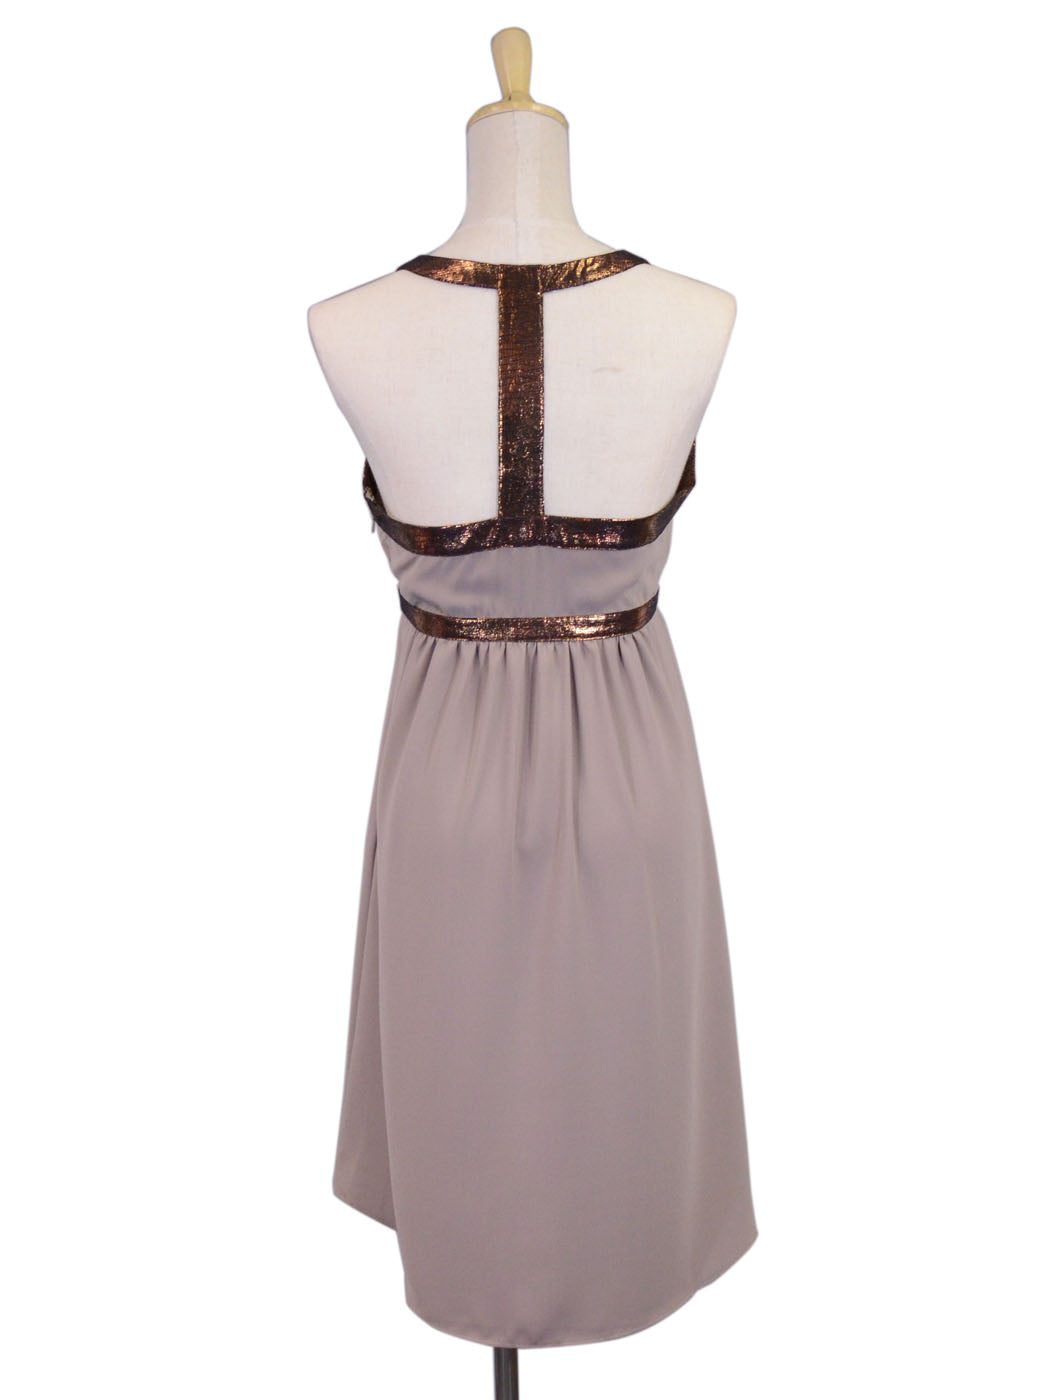 Gentle Fawn Grecian Flowy High Lo Dress With Snake Skin Print Straps And Cutouts - ALILANG.COM